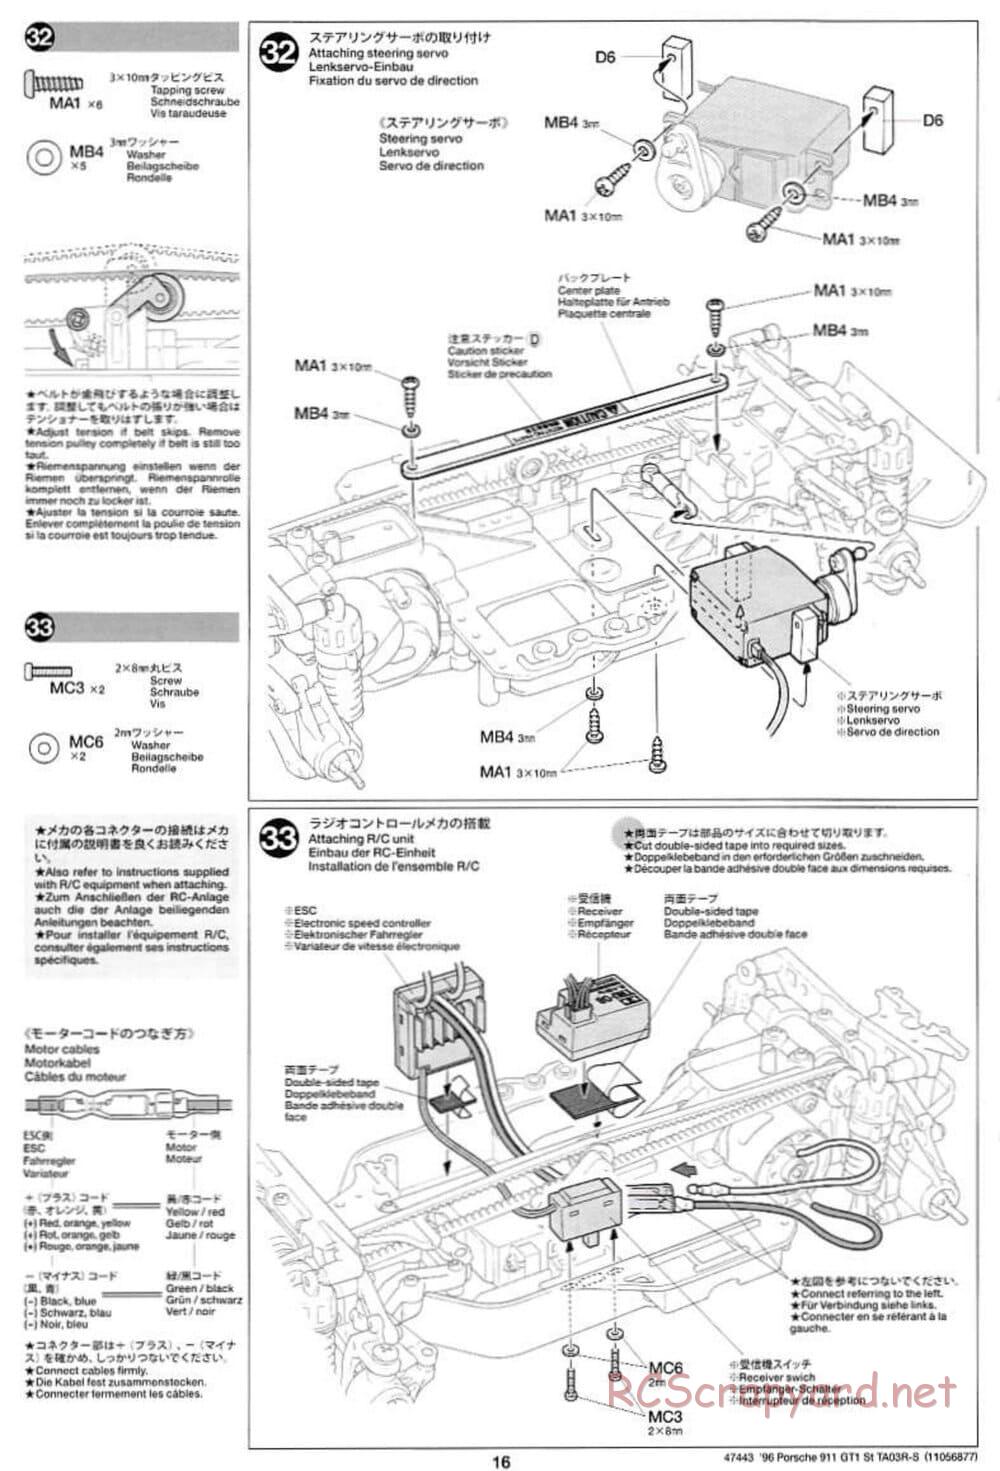 Tamiya - Porsche 911 GT1 Street - TA-03RS Chassis - Manual - Page 16